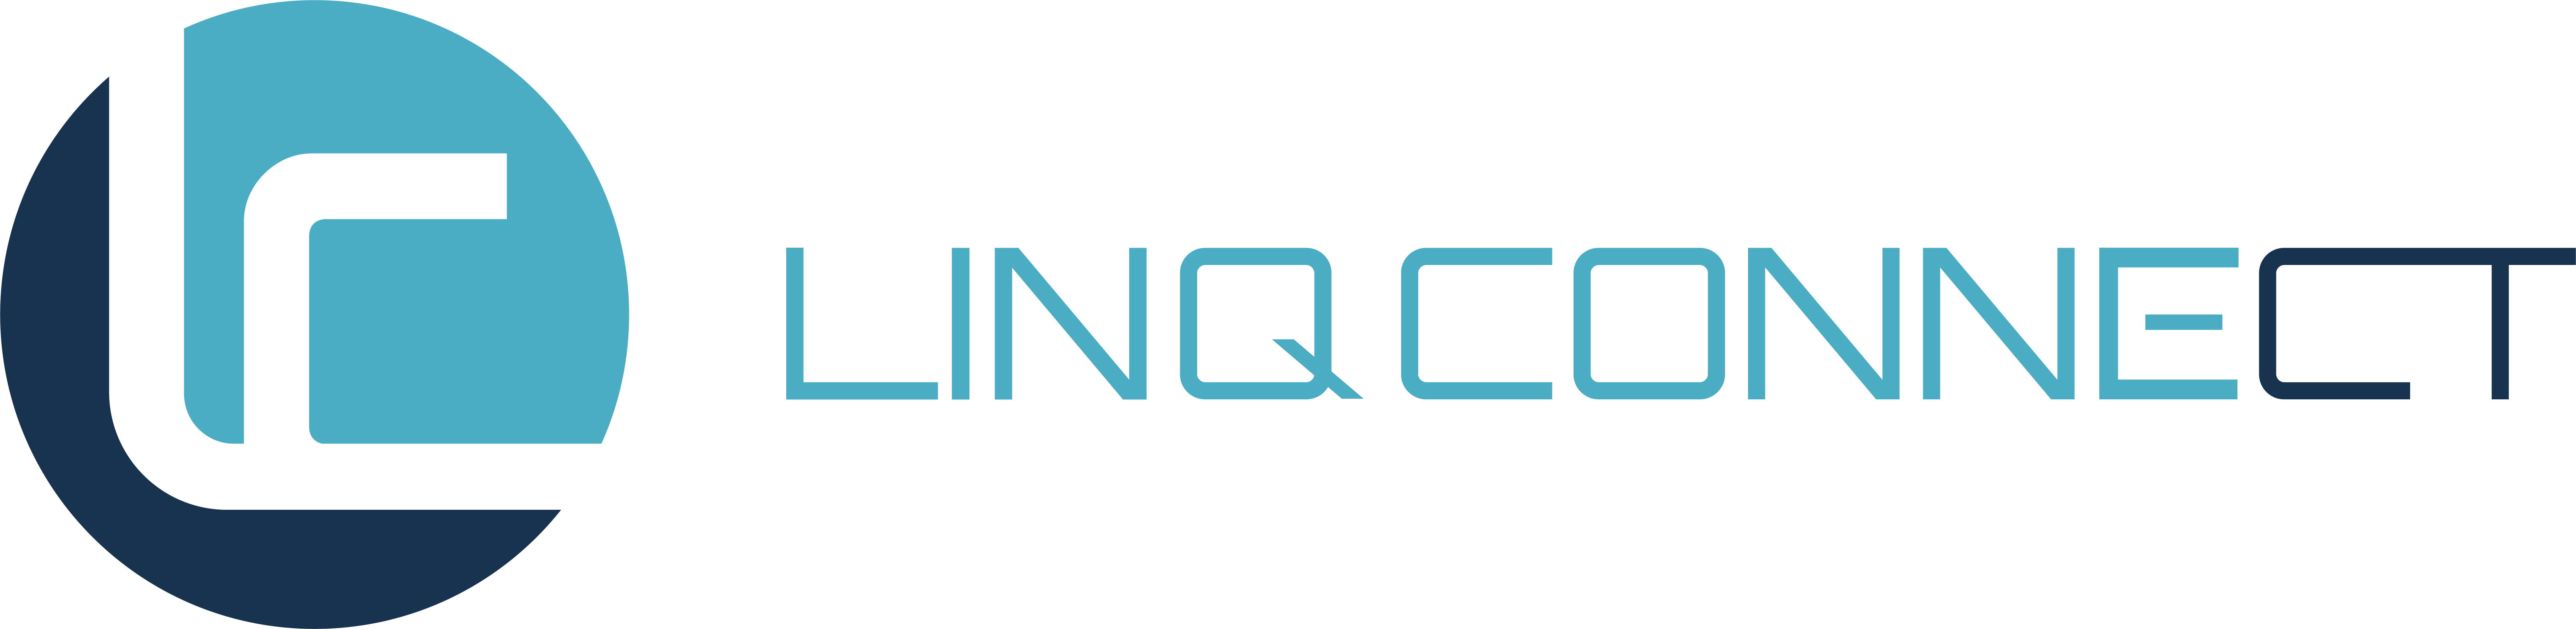 LINQCONNECT logo image links to the LINQCONNECT site